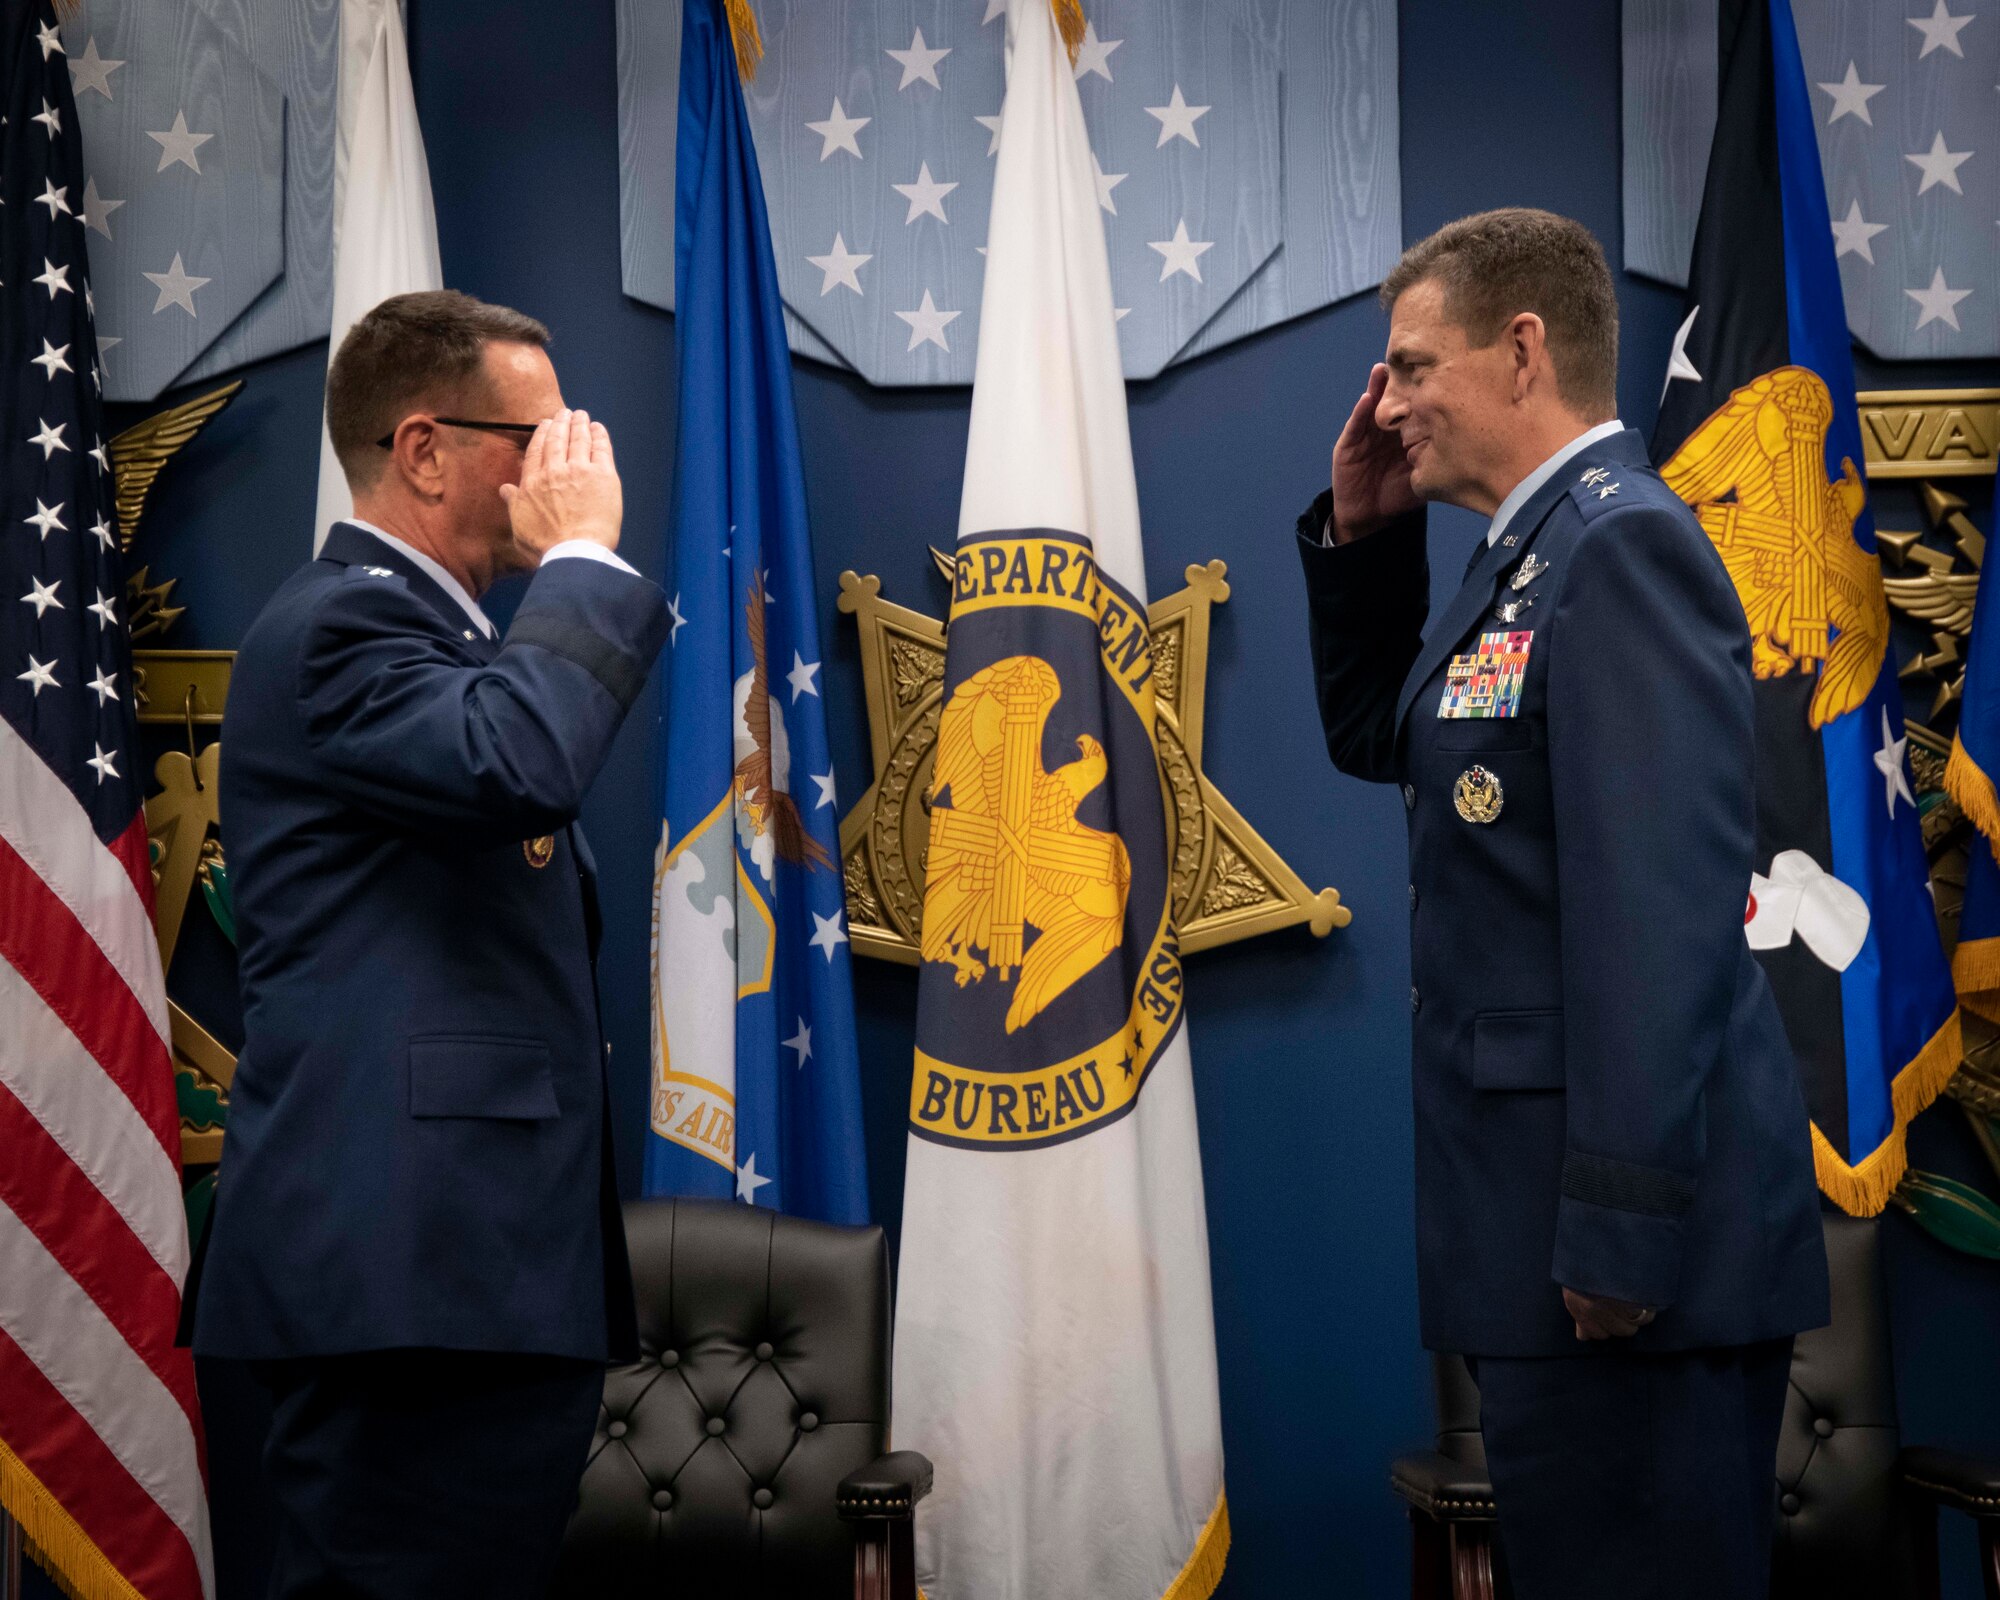 U.S. Air Force Lt. Gen. Michael A. Loh salutes Gen. Joseph L. Lengyel, the 28th Chief of the National Guard Bureau, during a Change of Responsibility ceremony at the Pentagon July 28, 2020. During the ceremony, Loh assumed responsibility as the 13th director of the Air National Guard and was promoted to the rank of lieutenant general. (U.S. Air National Guard photo by Technical Sgt. Morgan R. Lipinski)